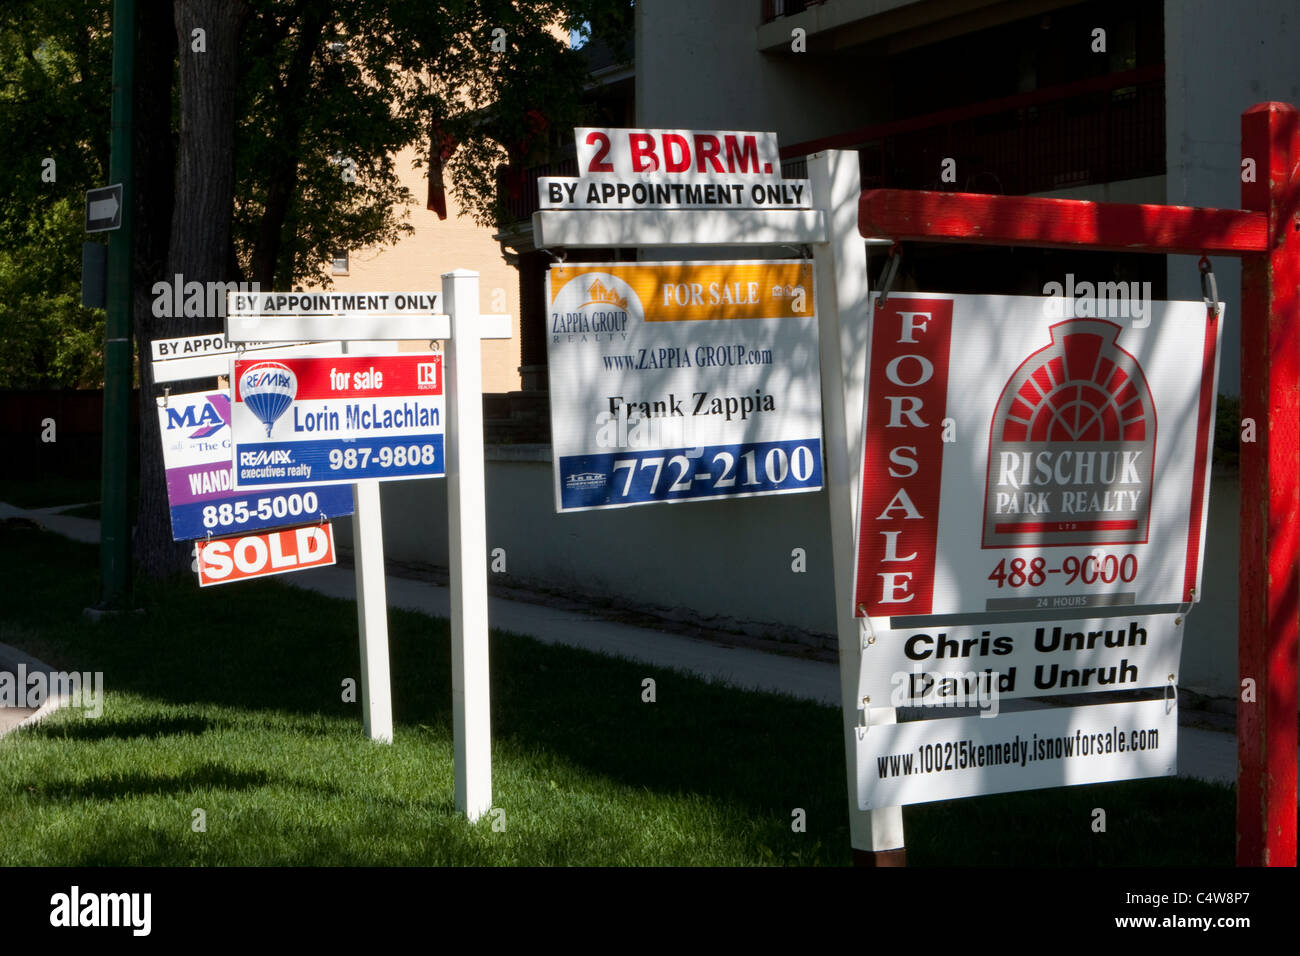 "For sale" signs for Maximum realty, Re/Max, Zappia Group realty and Rischuk Park realty are seen next to each other in Winnipeg Stock Photo